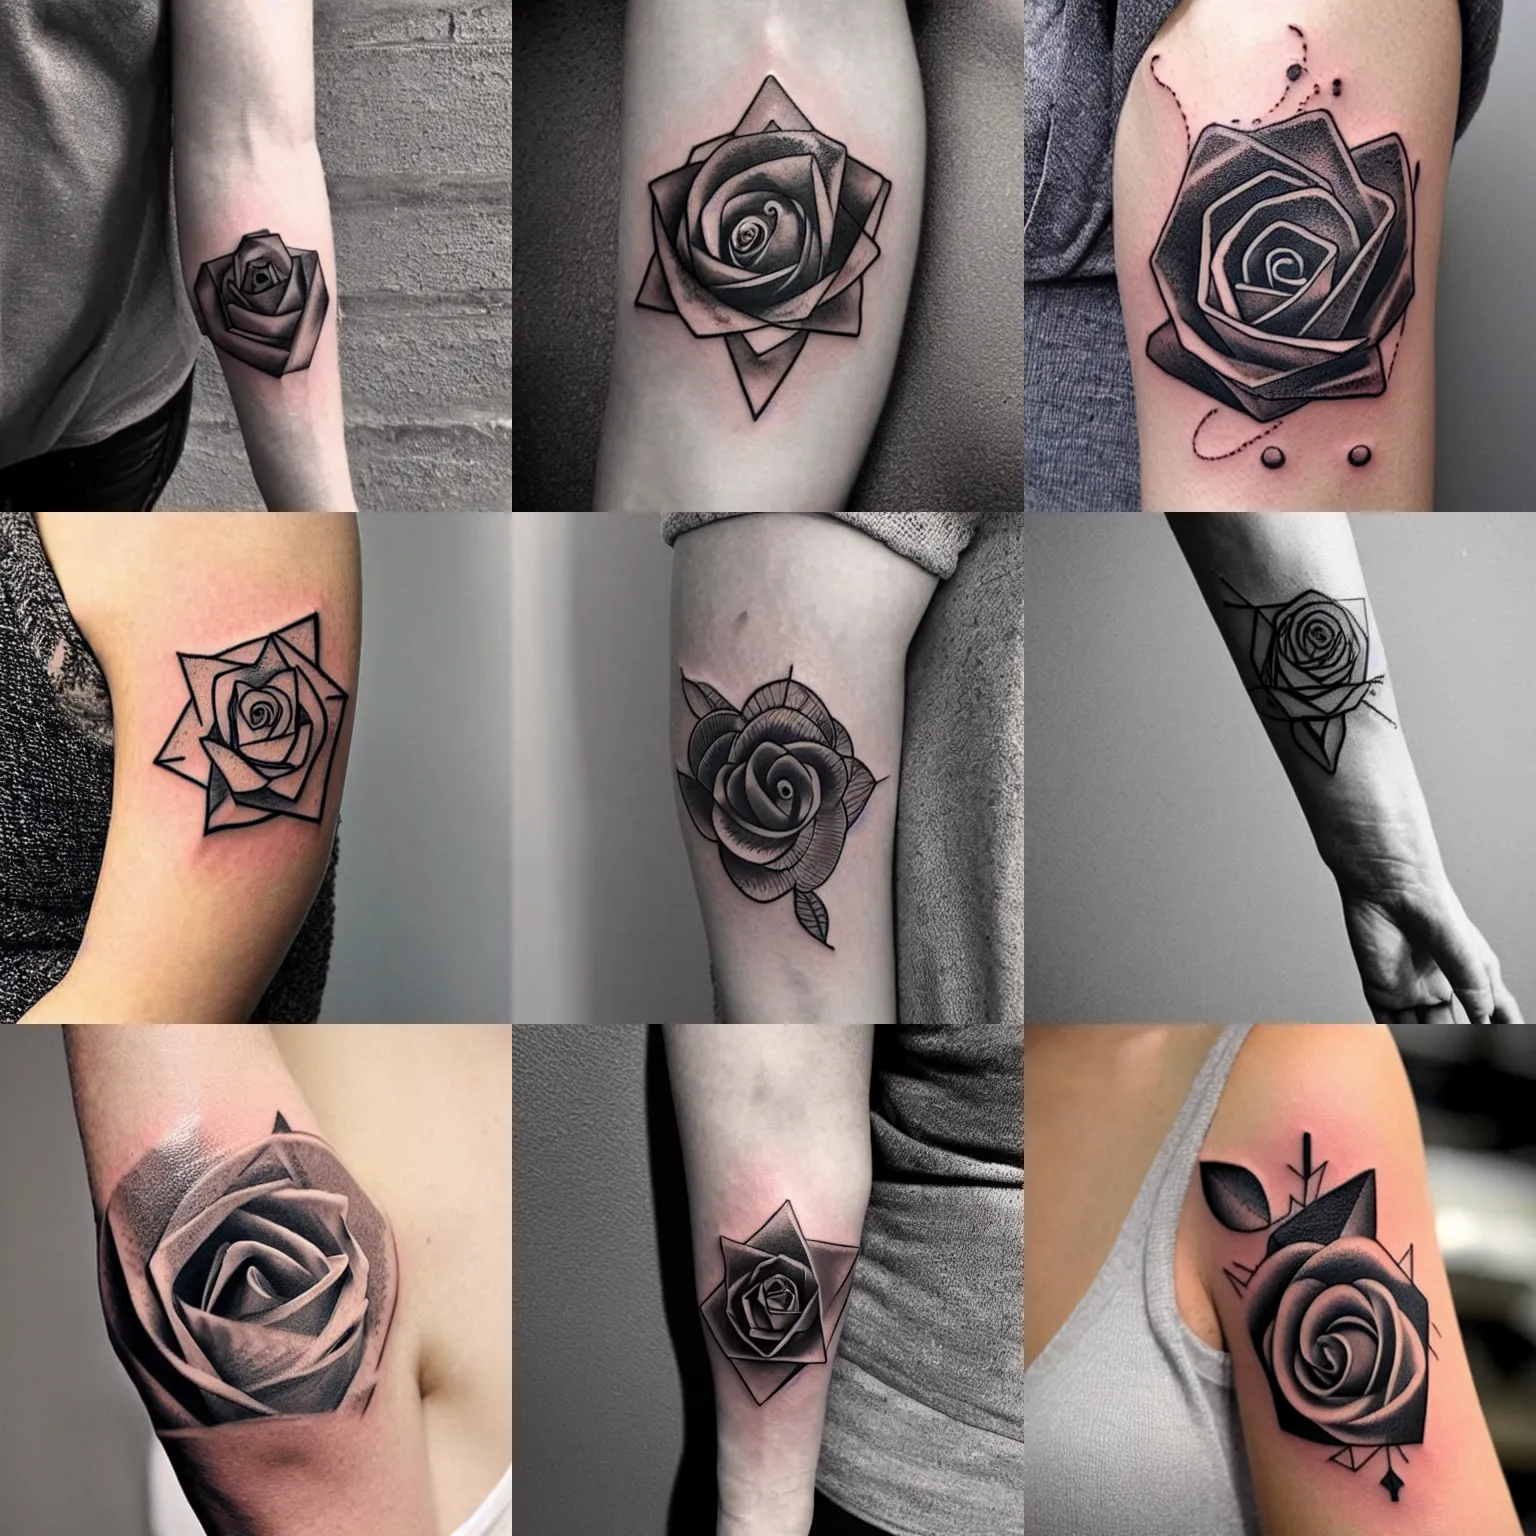 29 varitions of a rose tattoo - You are going to love